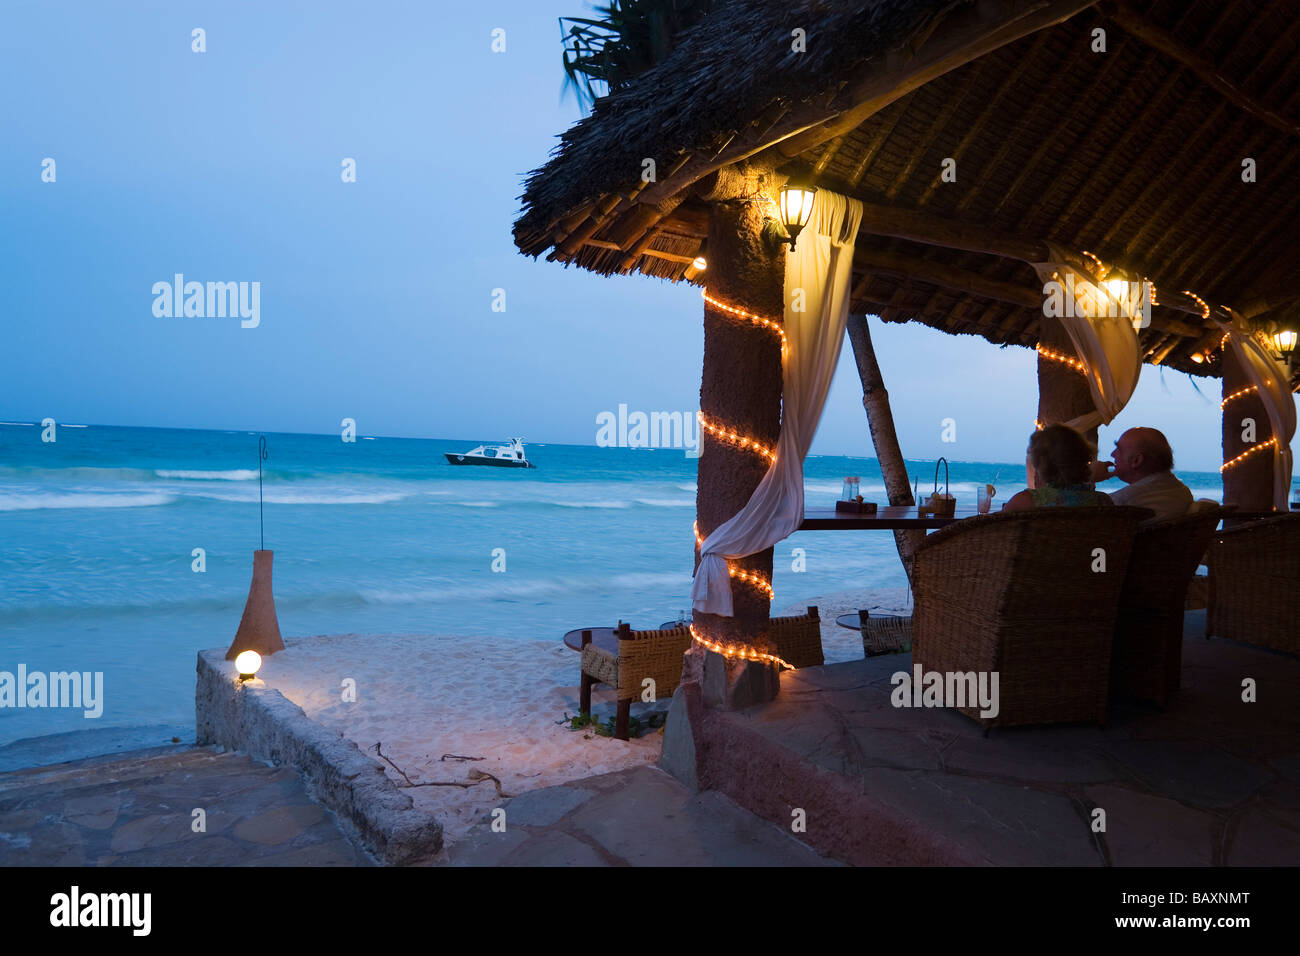 Couple sitting in a beach bar, The Sands, at Nomad, Diani Beach, Kenya Stock Photo